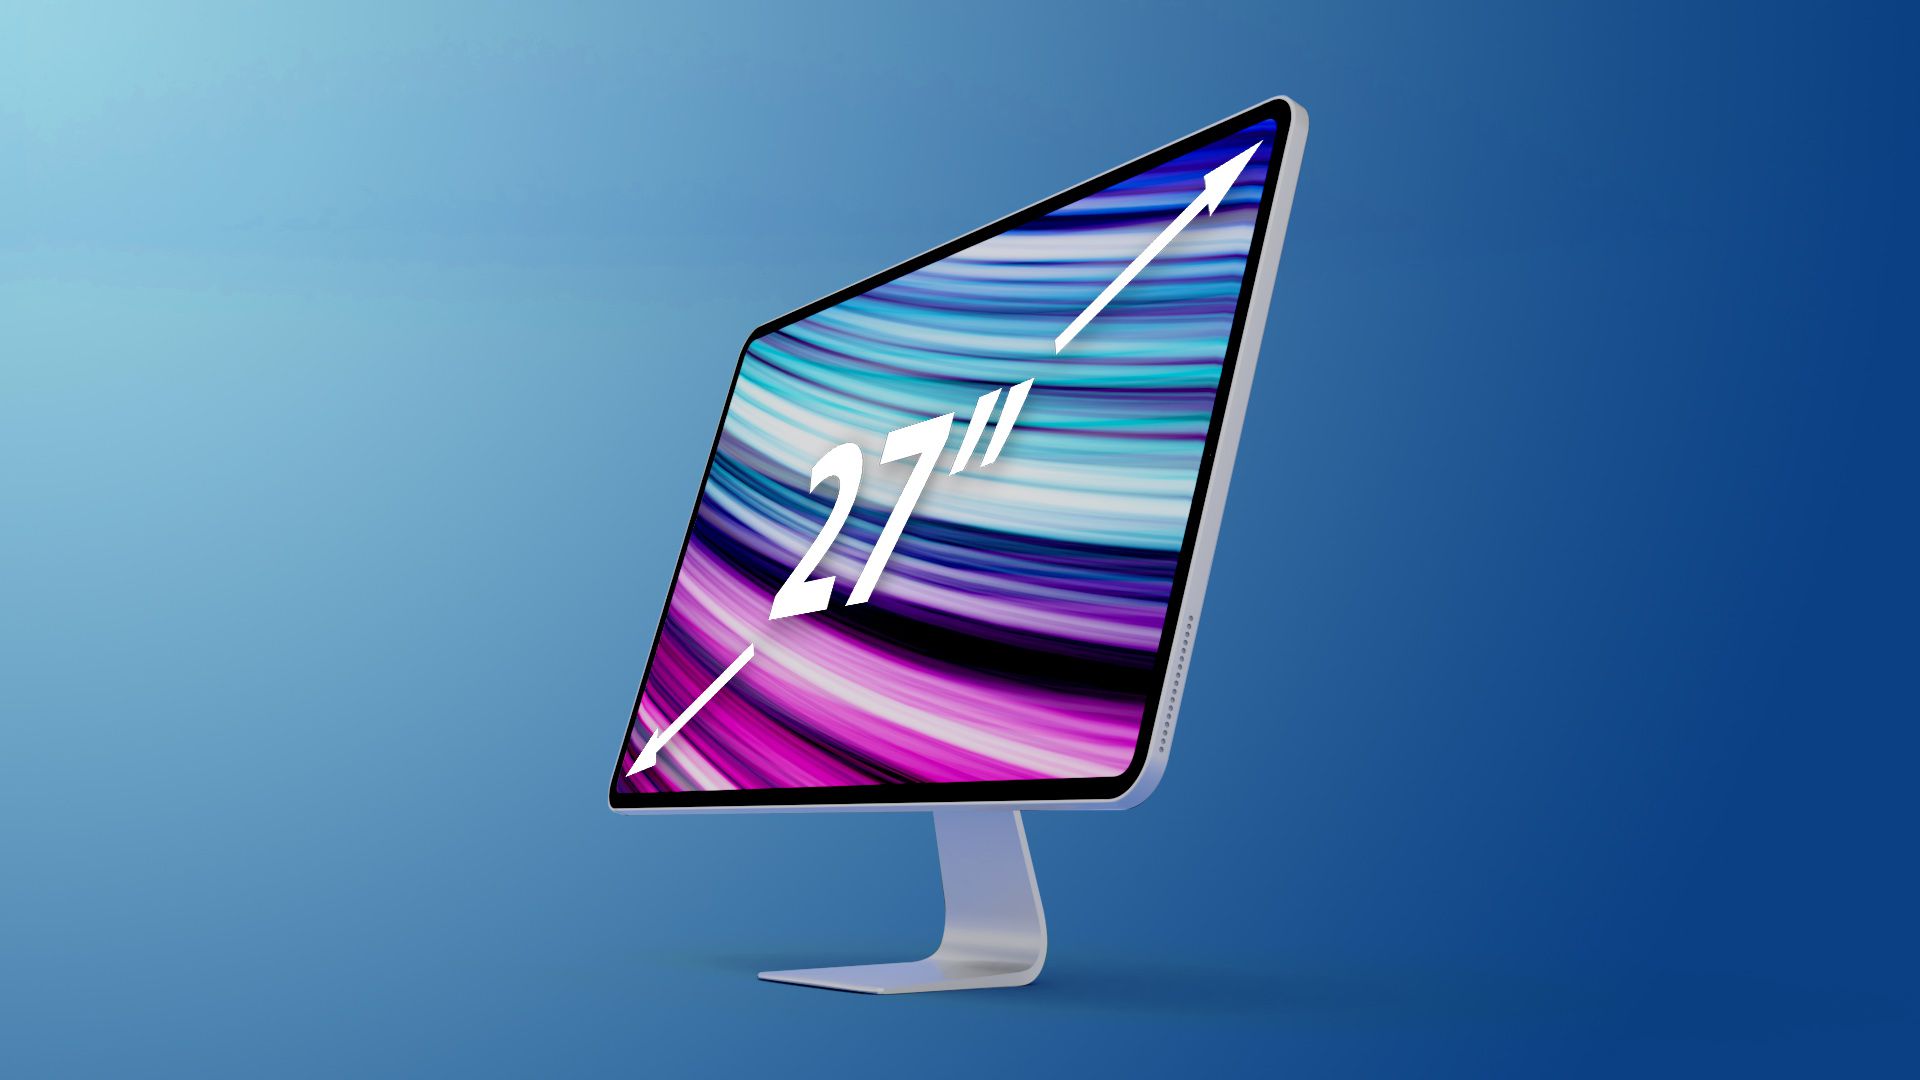 Leaked: in 2022, Apple will release a 27-inch iMac Pro with M1 Pro/Max chips, Mini-LED display and a price tag above $2000